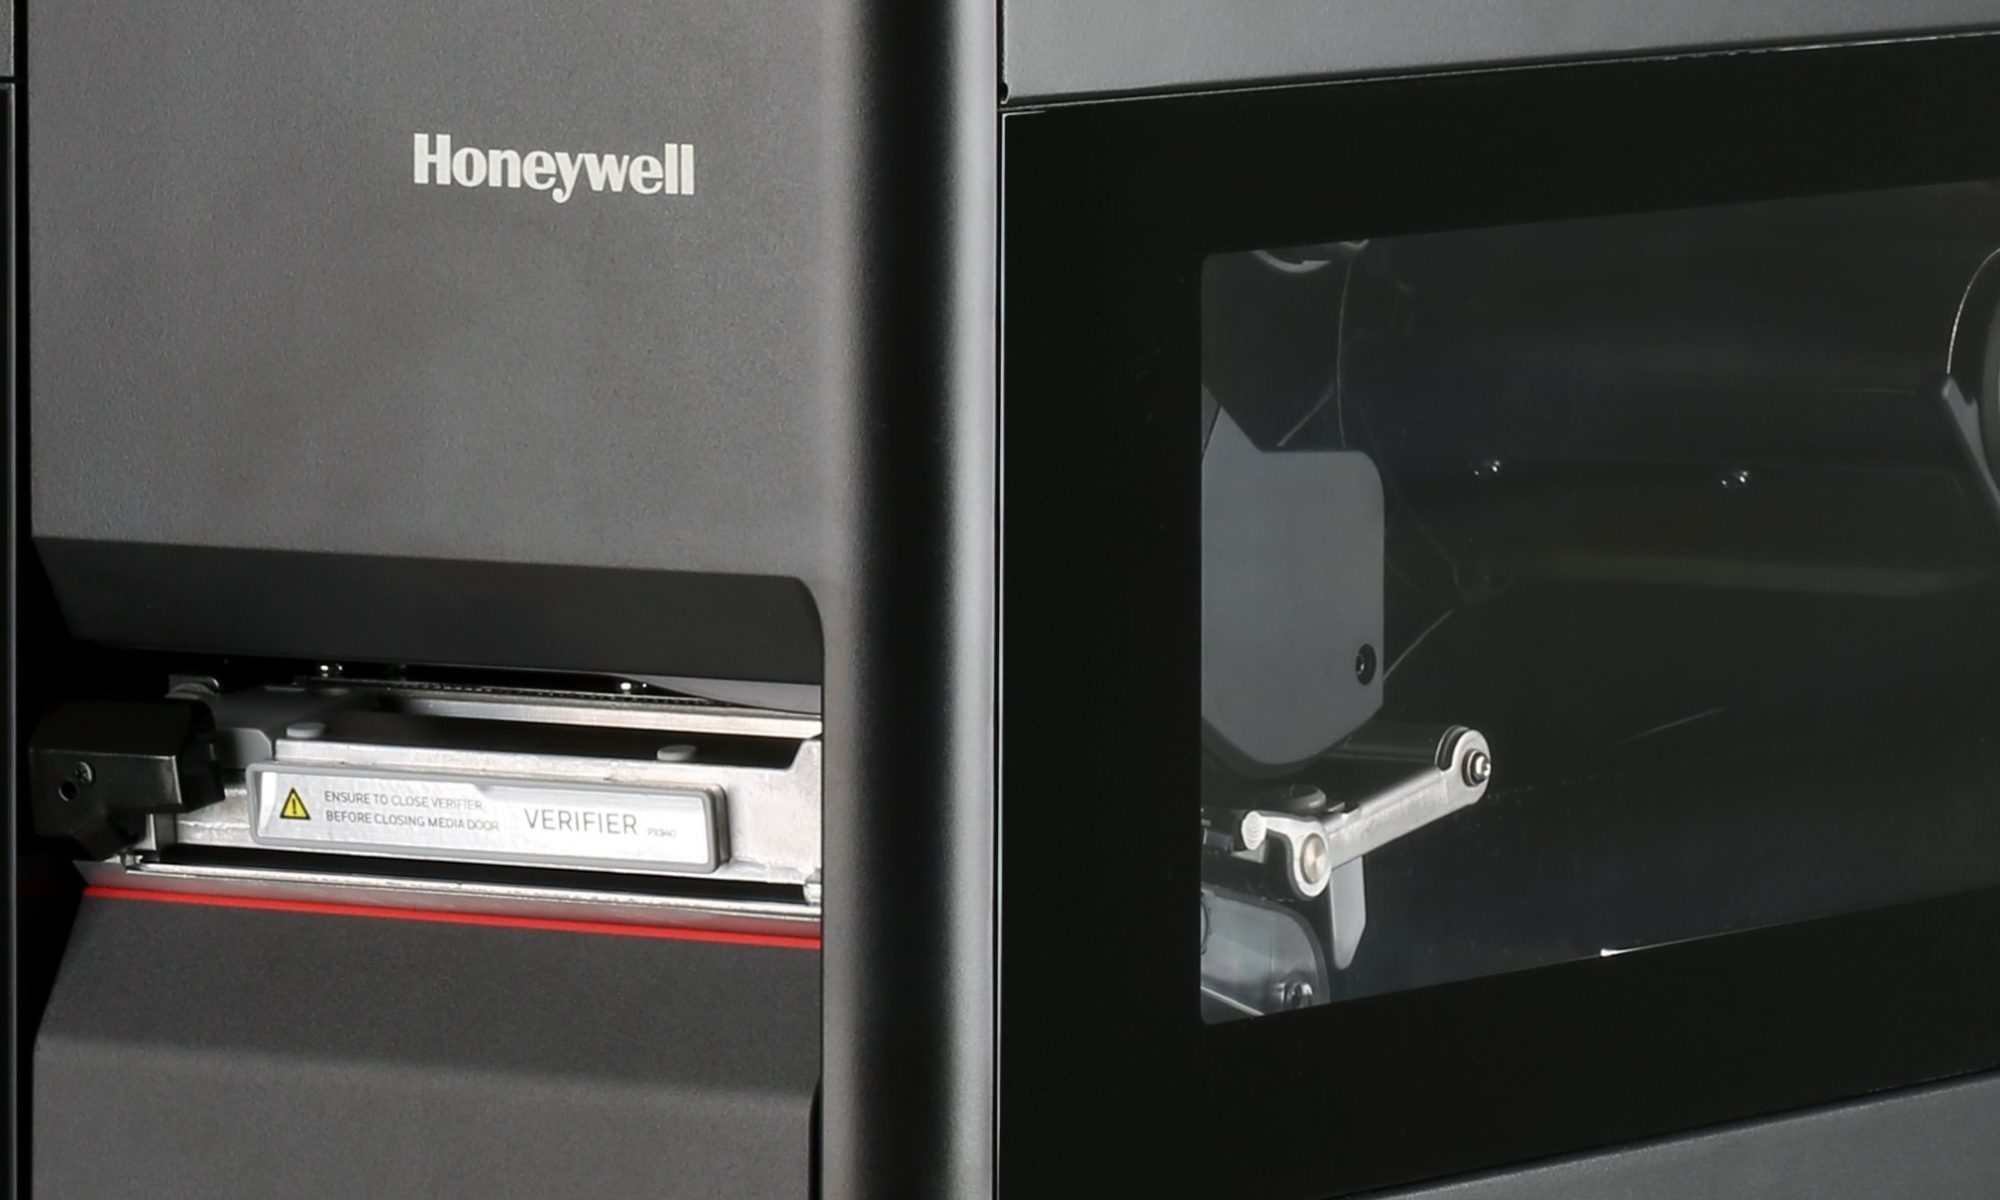 Honeywell - PX940, 600 DPI, TT, Full Touch display, USB, ETHER, CORE 3,  PEEL, REW, WITHOUT VERIF 